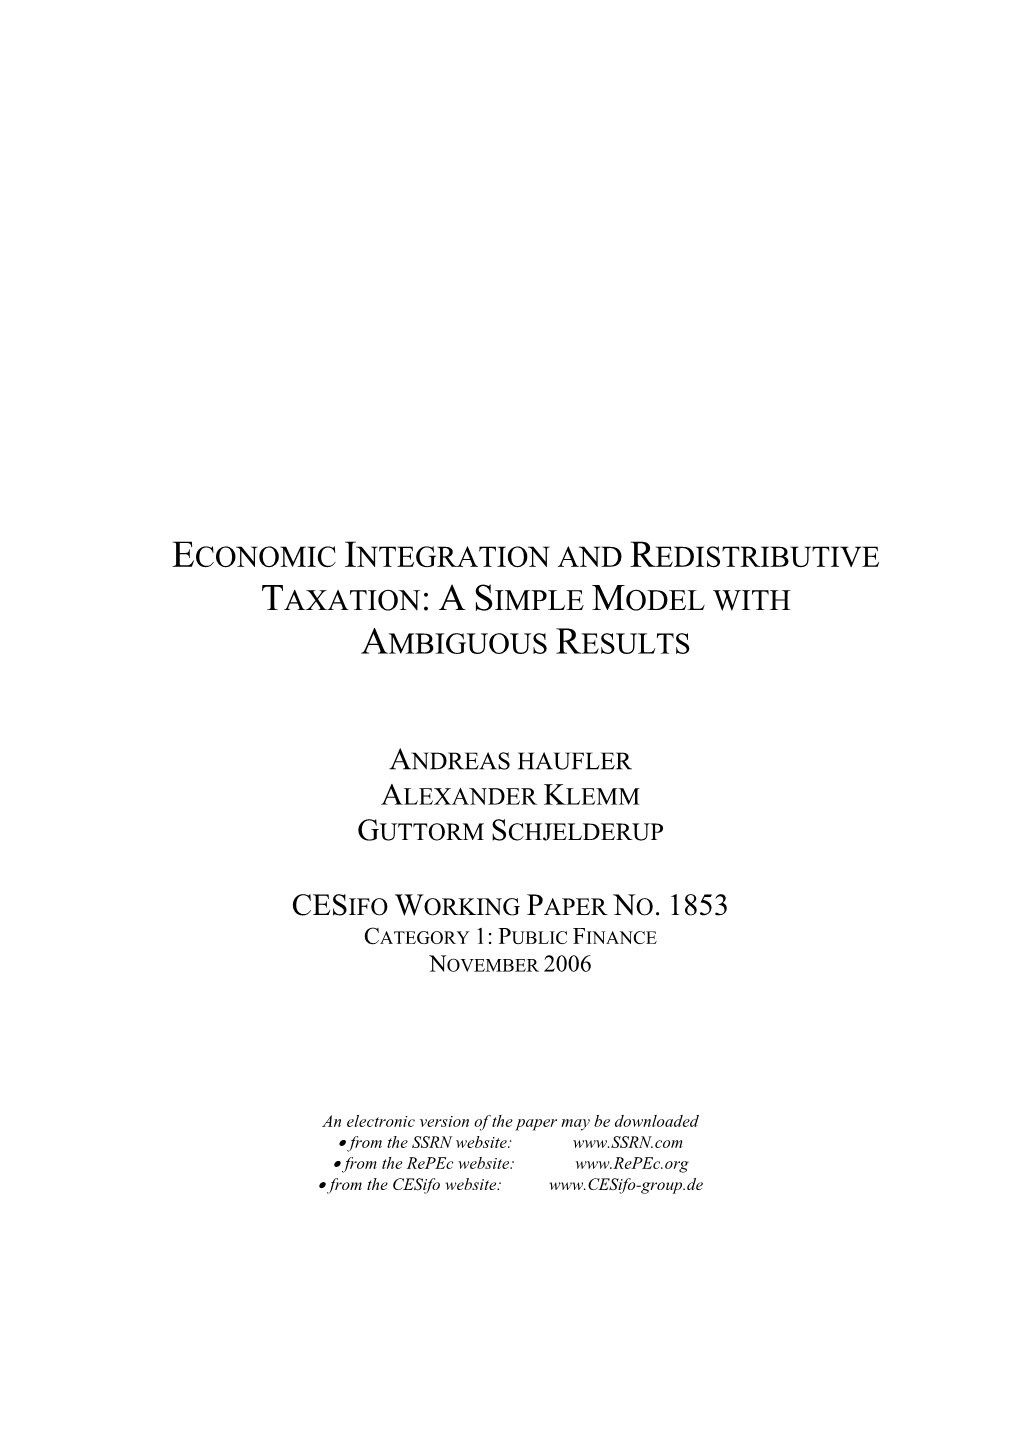 Economic Integration and Redistributive Taxation: a Simple Model with Ambiguous Results